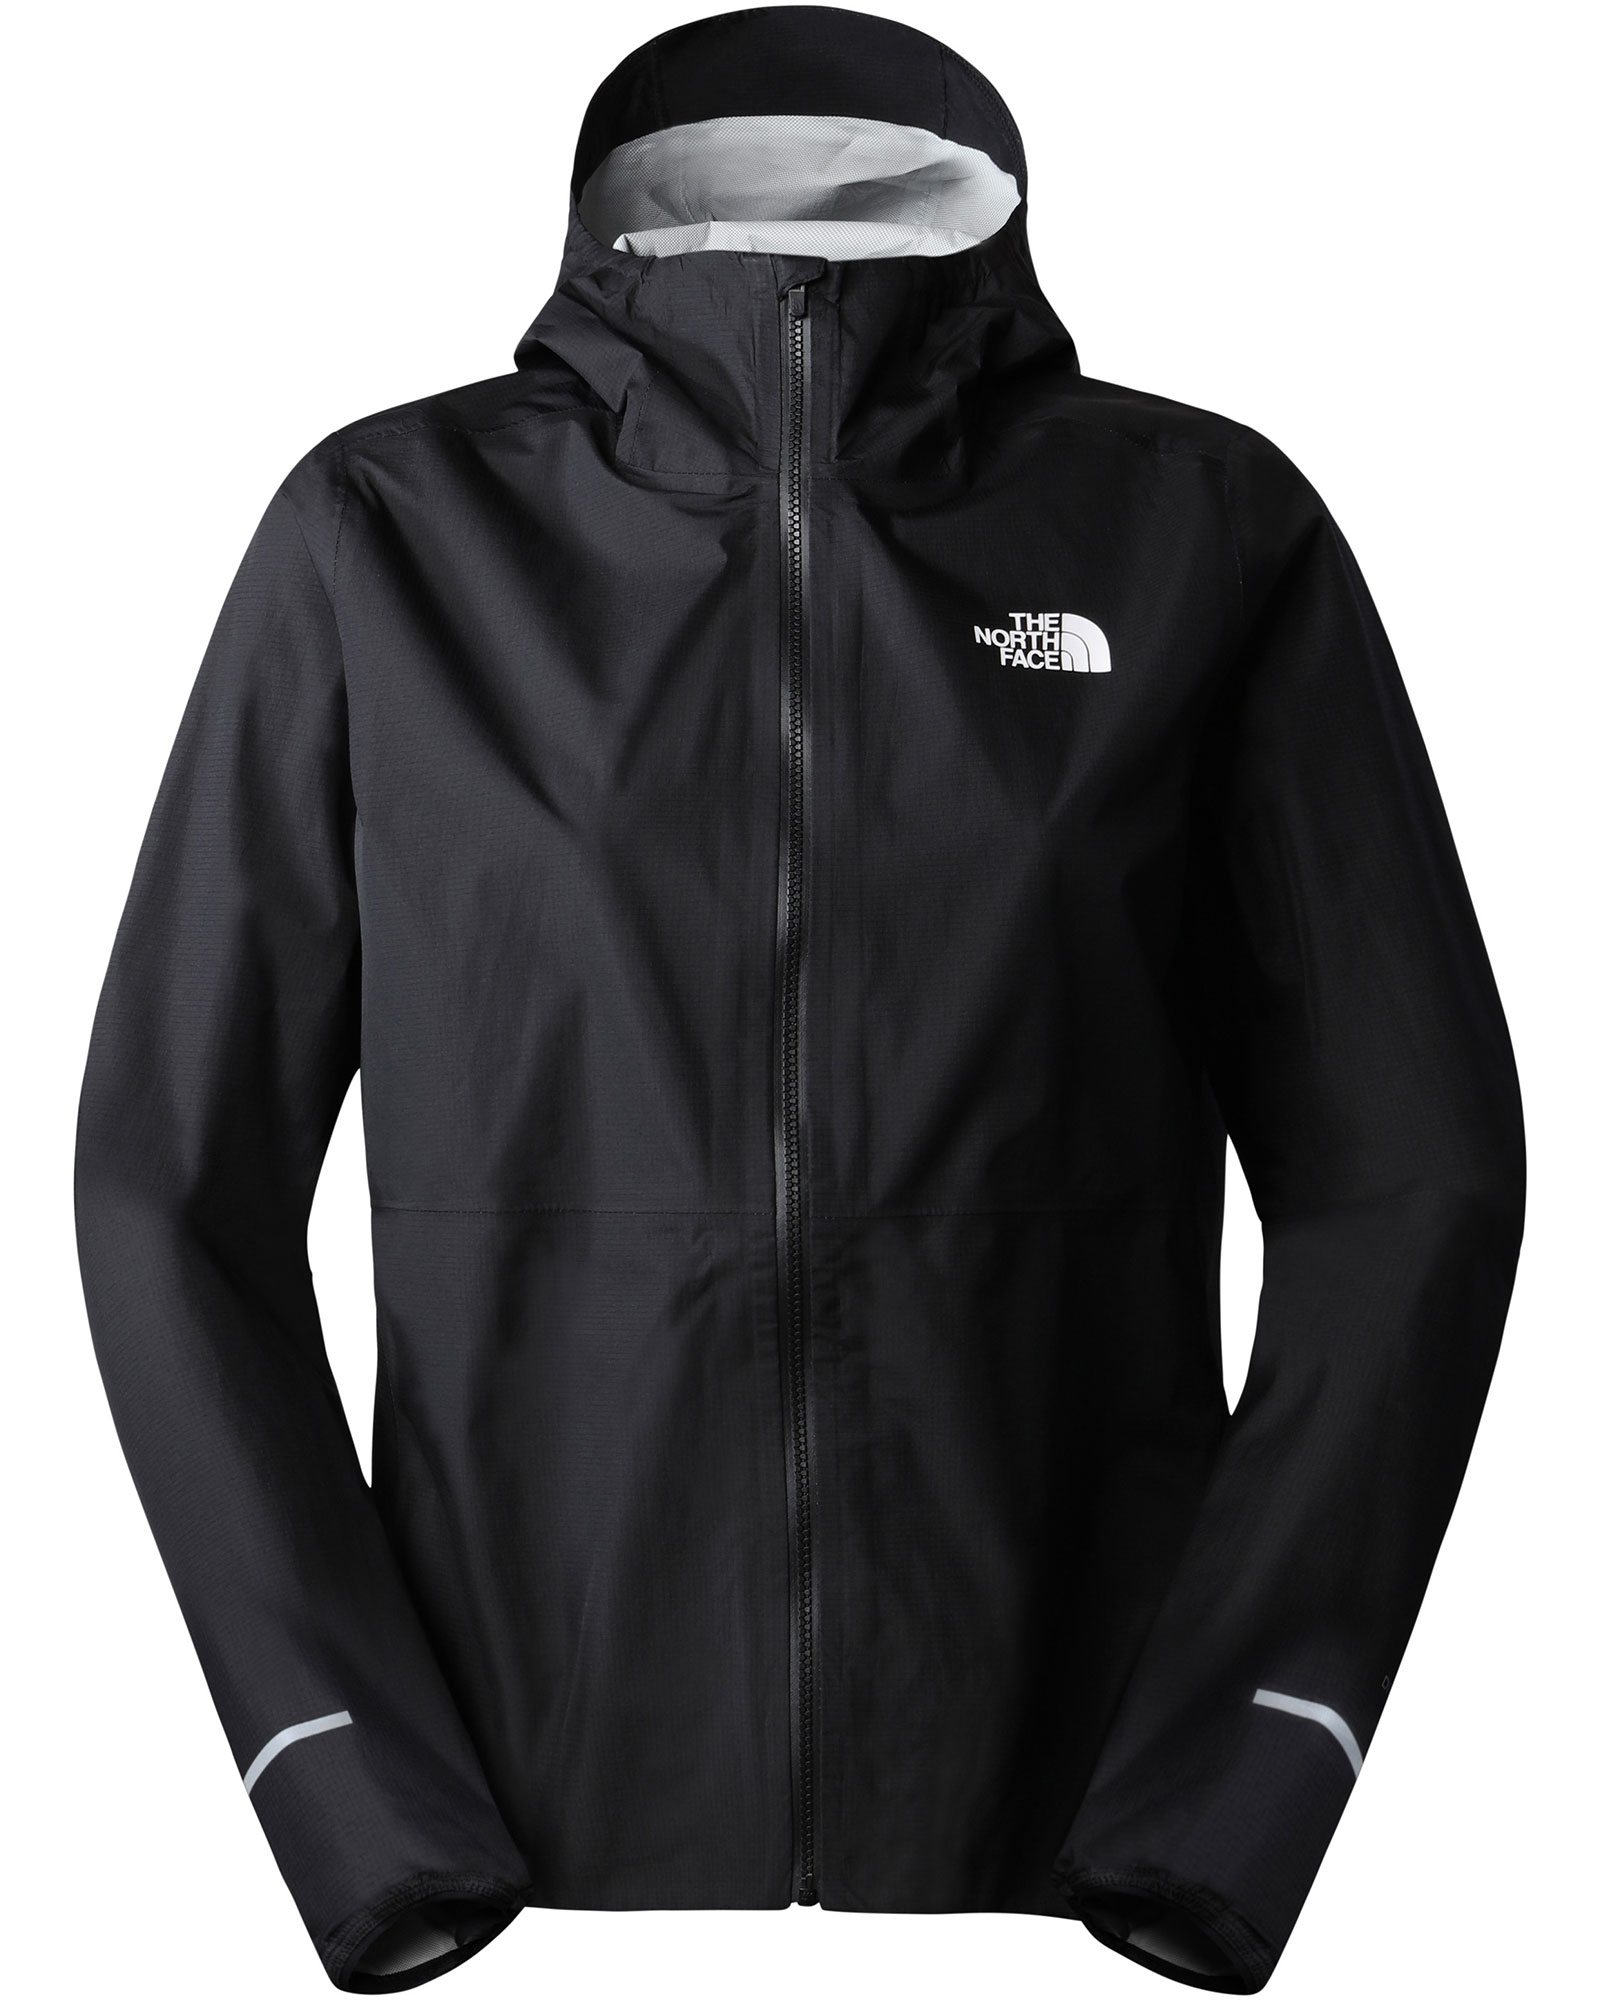 The North Face Womens Higher Run Jacket